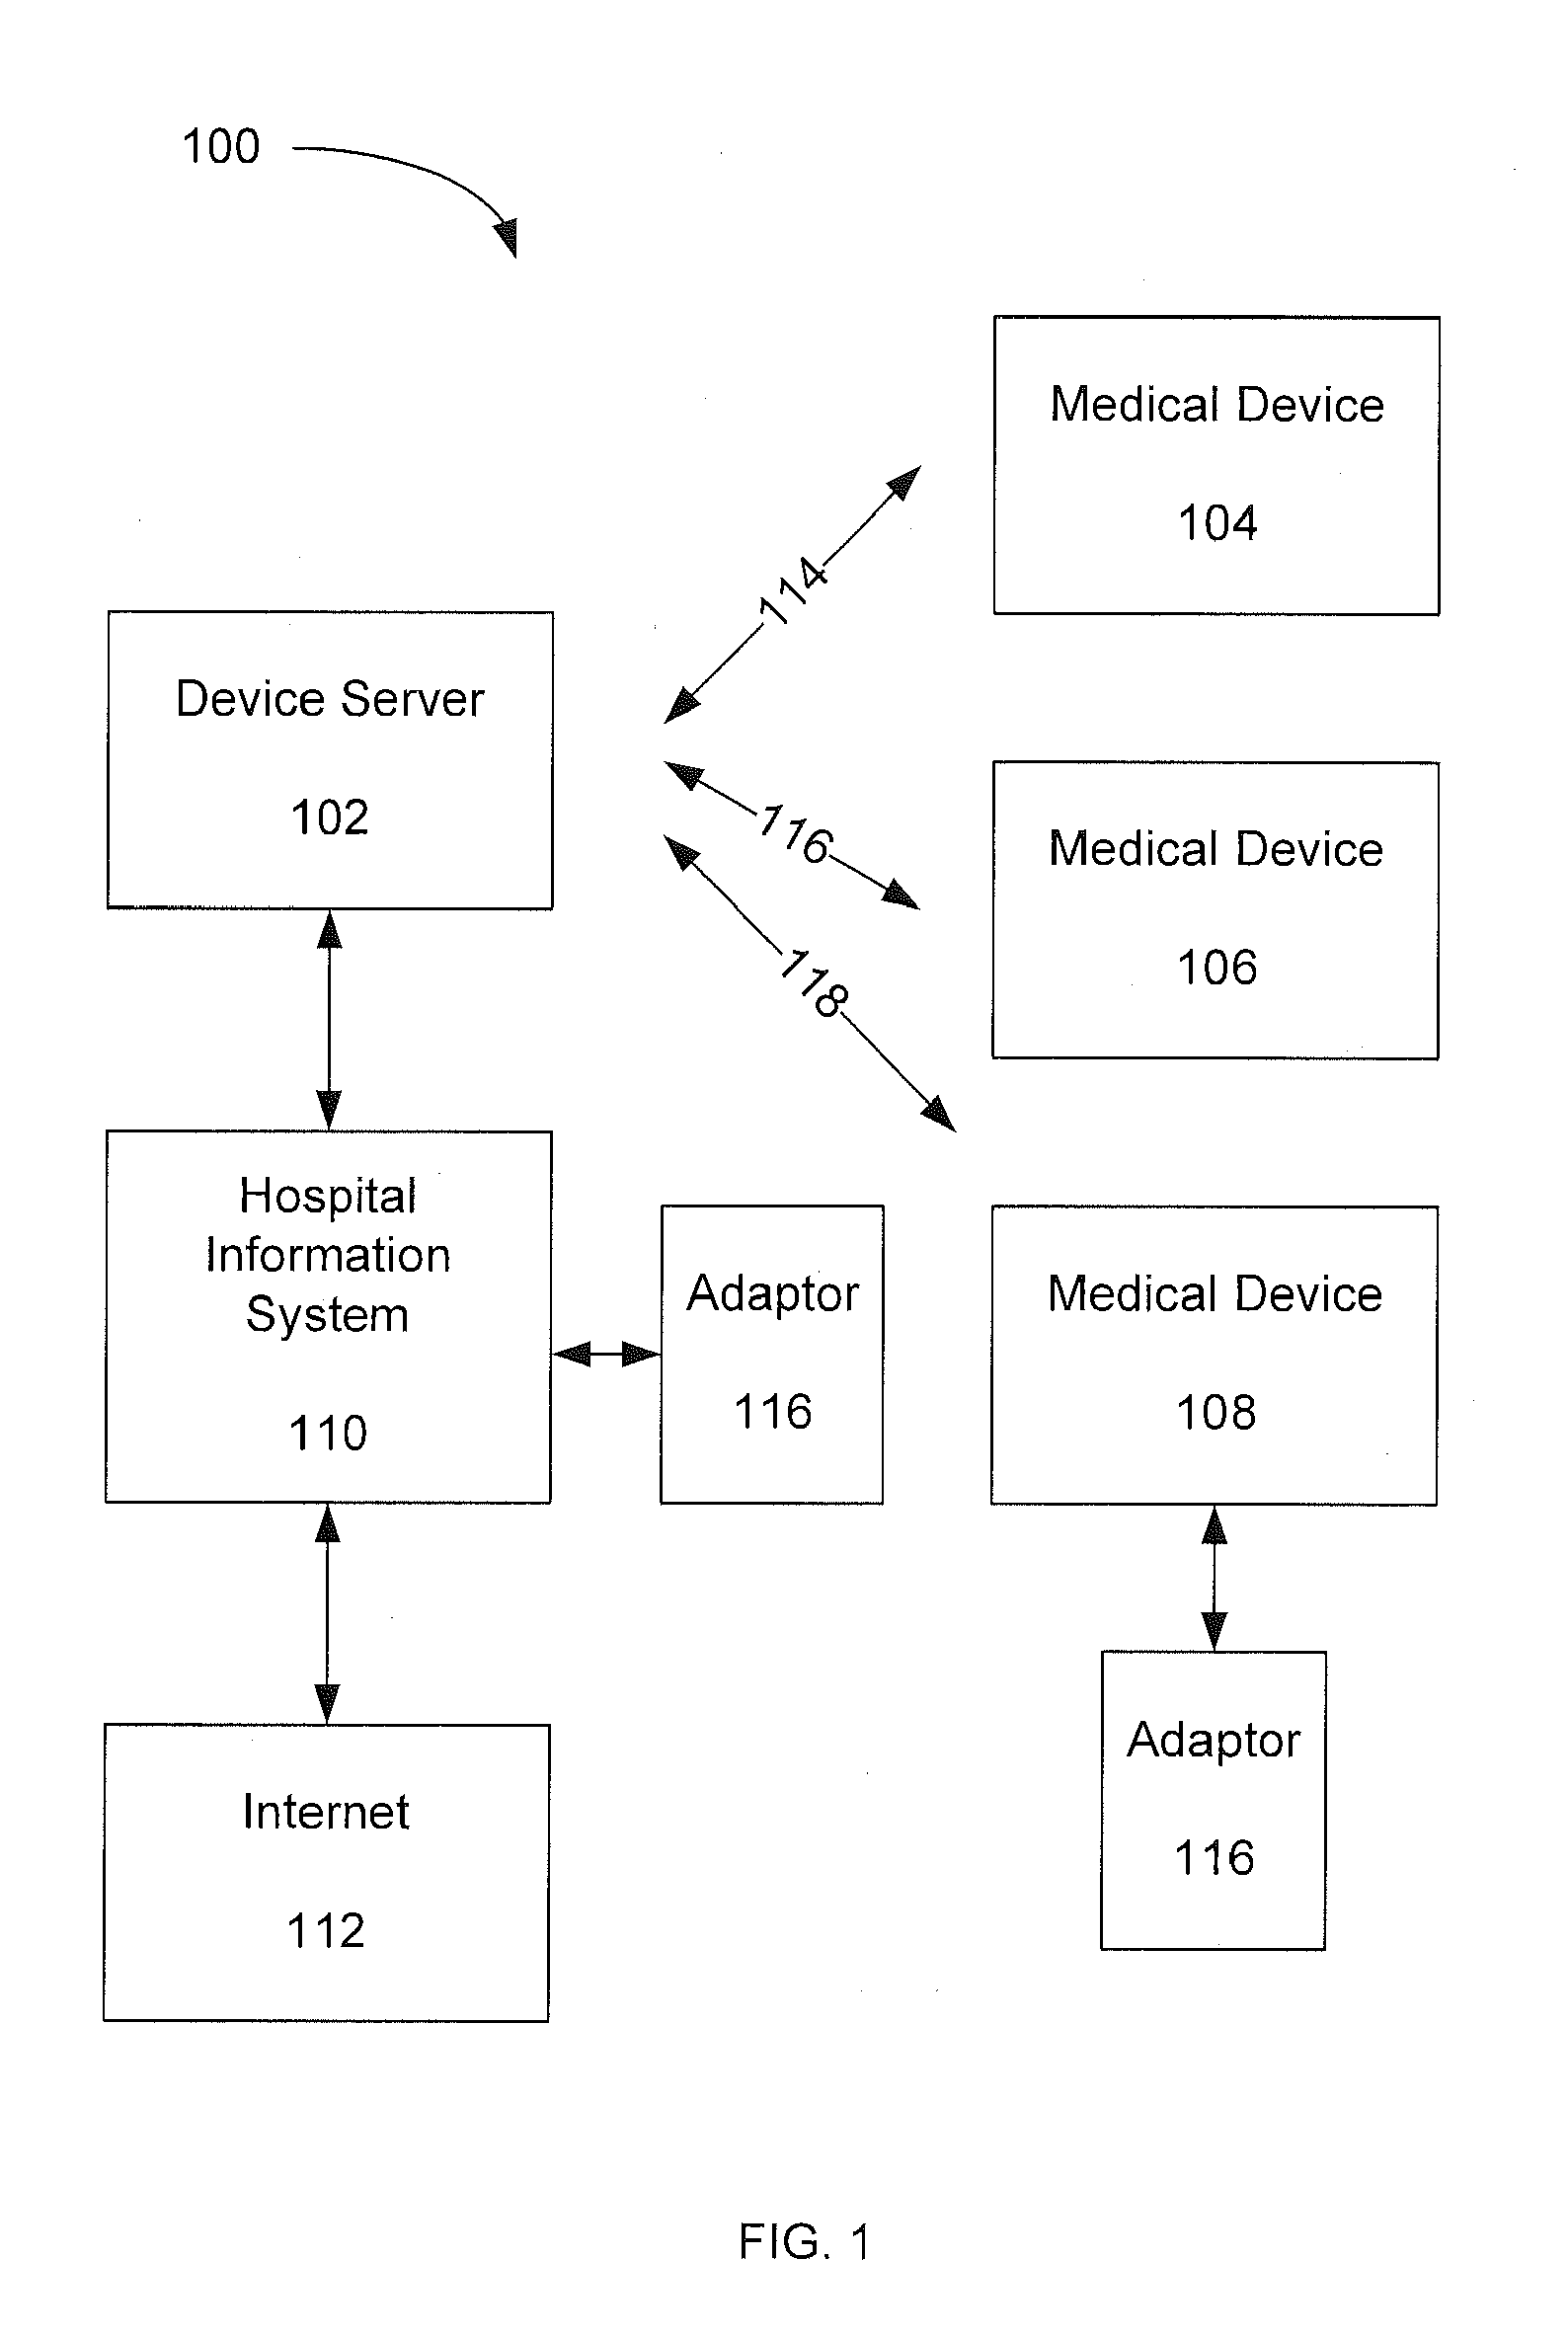 Medical Device Connectivity to Hospital Information Systems Using Device Server